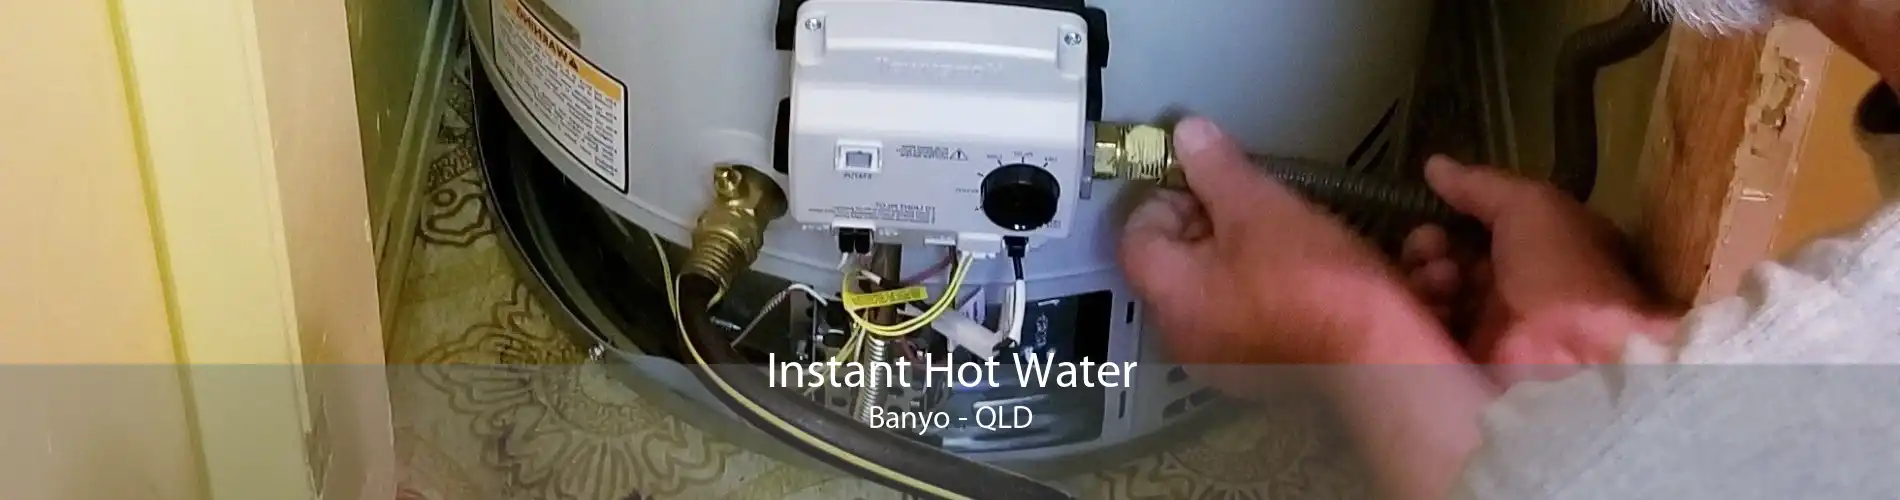 Instant Hot Water Banyo - QLD